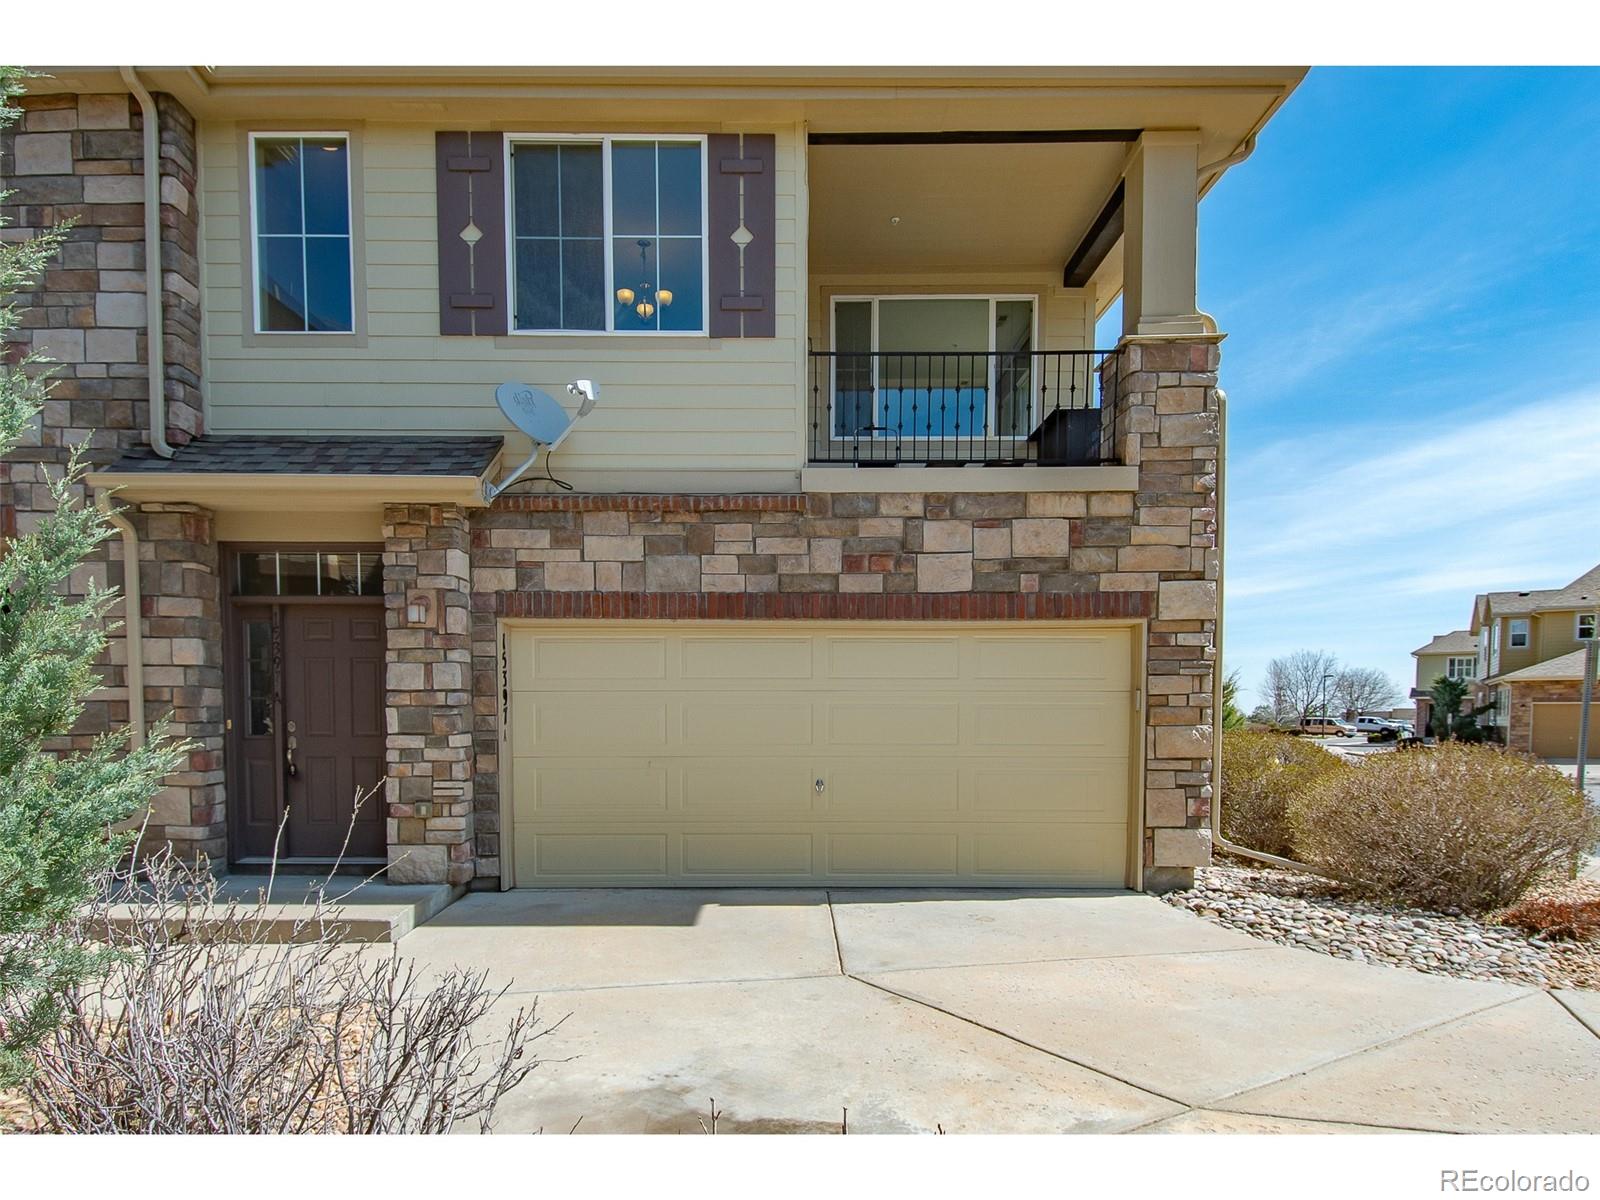 15397 W 66th Drive, arvada MLS: 7733992 Beds: 2 Baths: 2 Price: $505,000